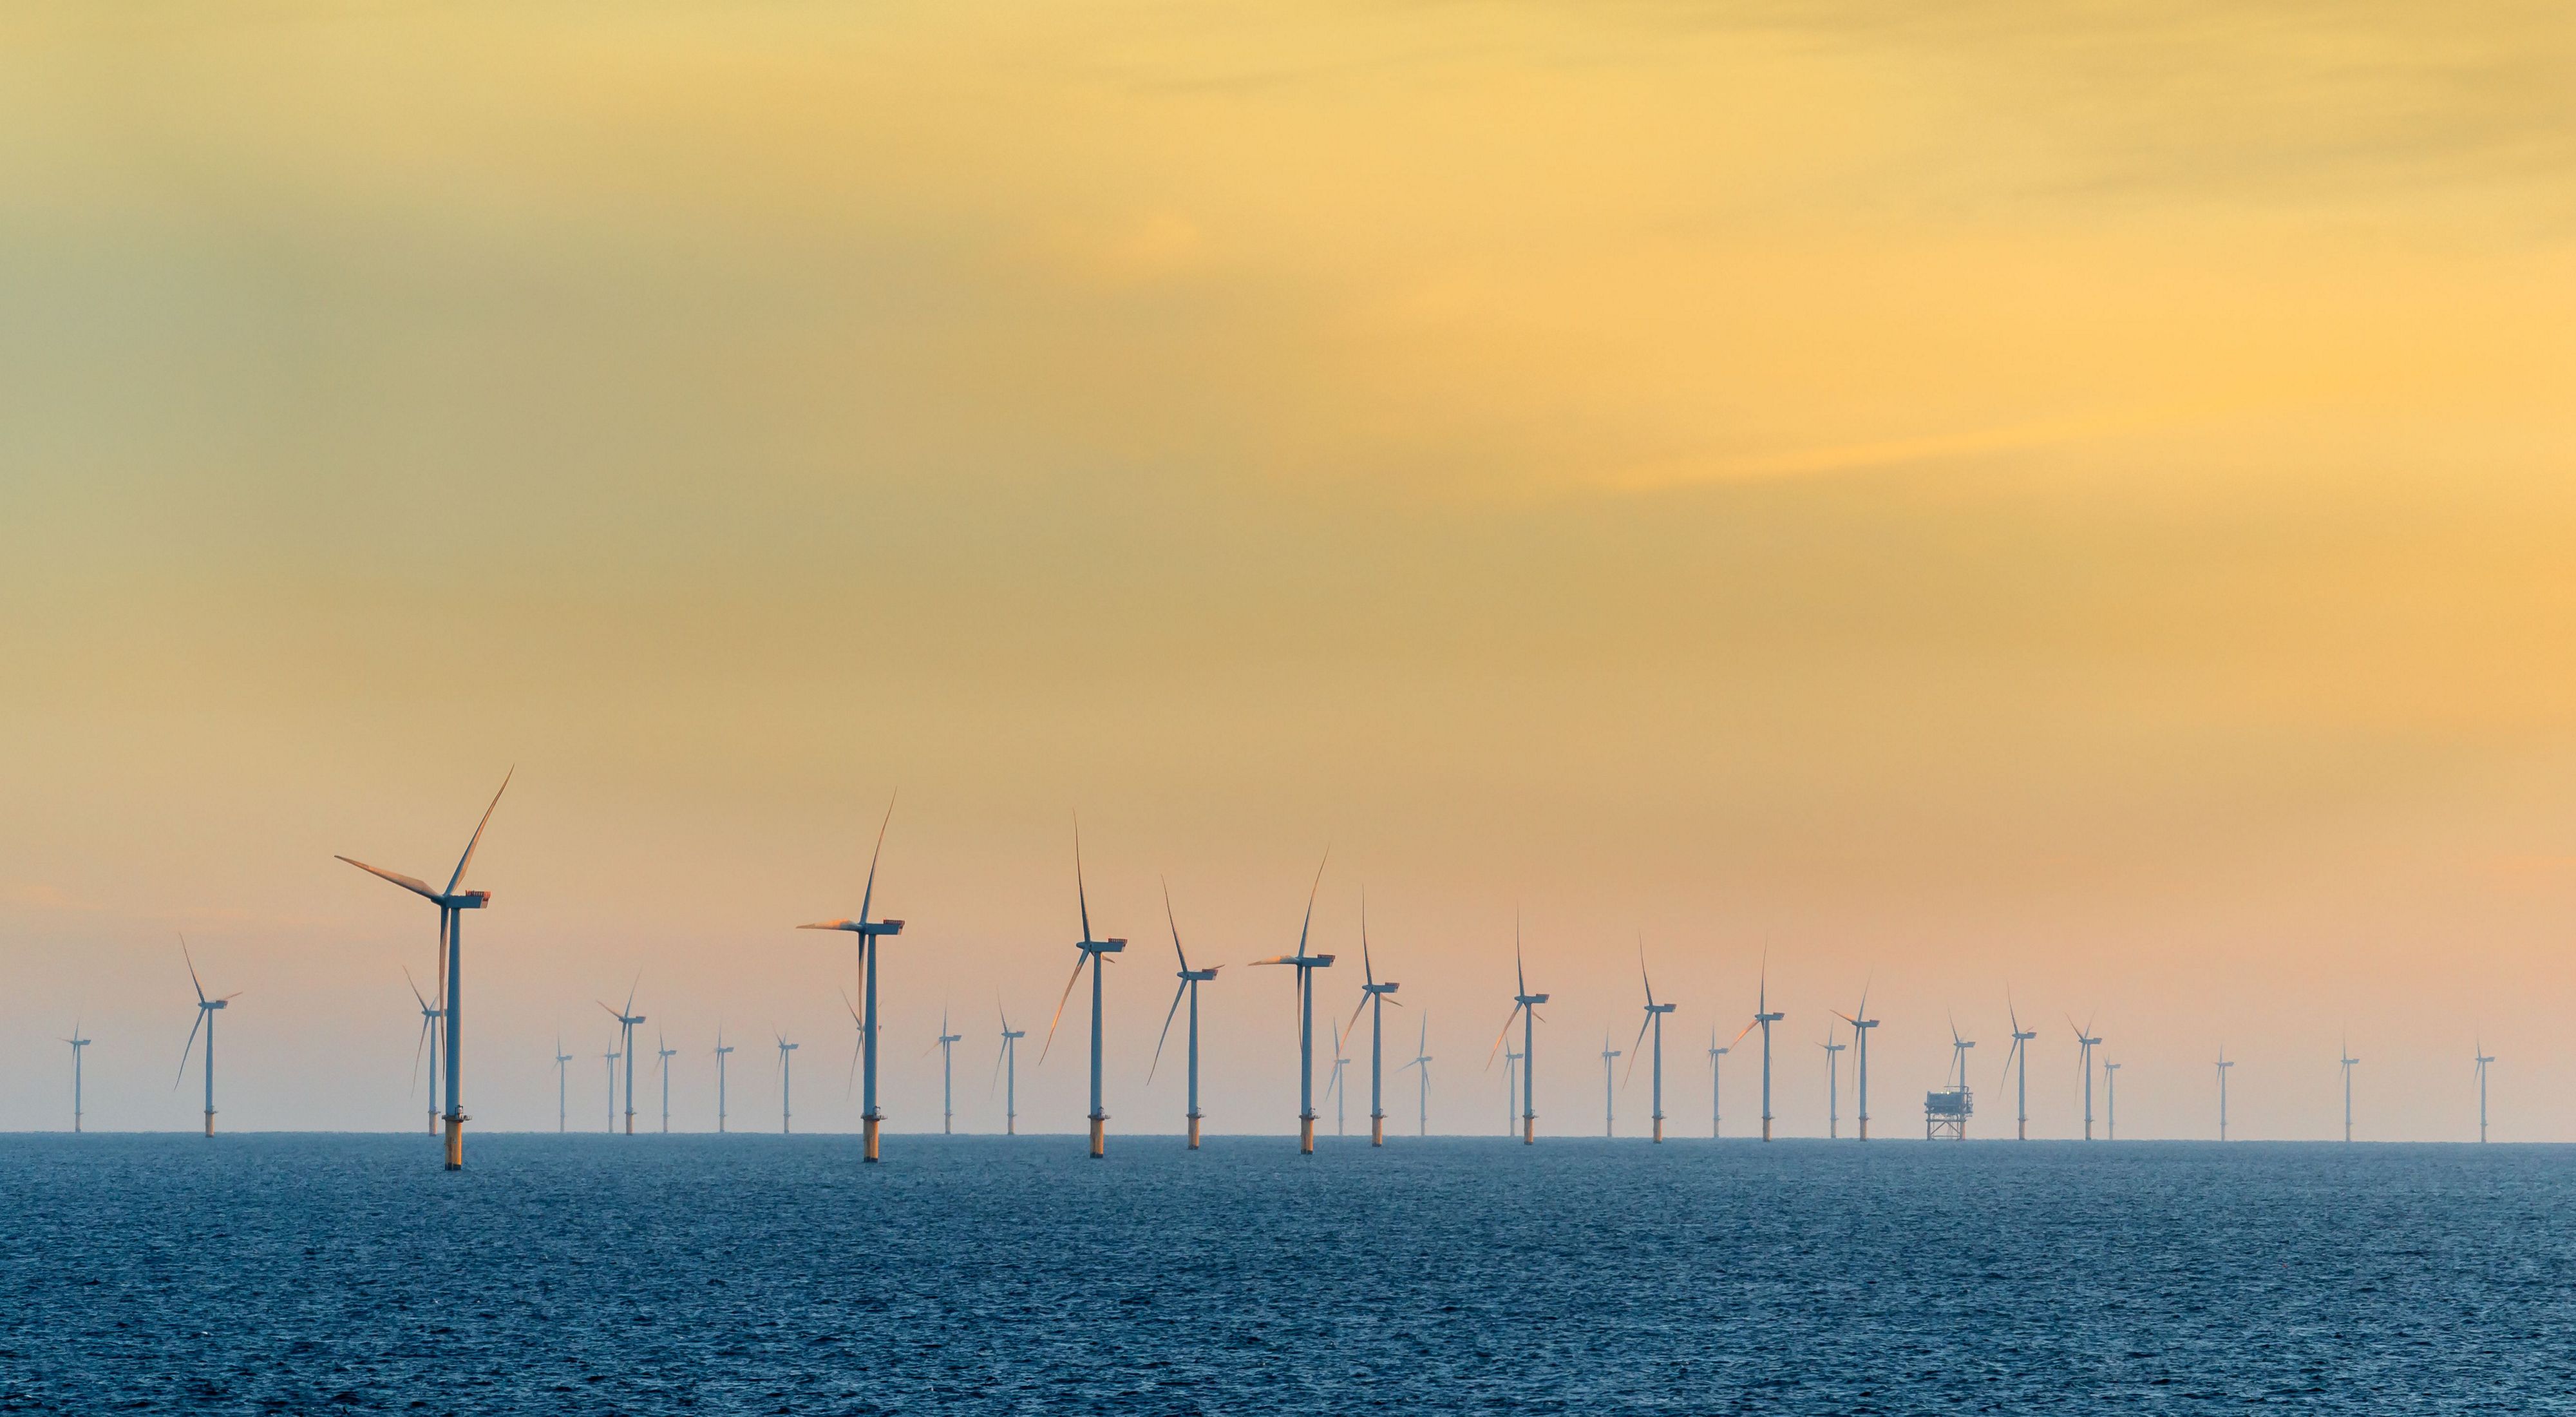 Photo of dozens of offshore wind turbines in the ocean at sunset.